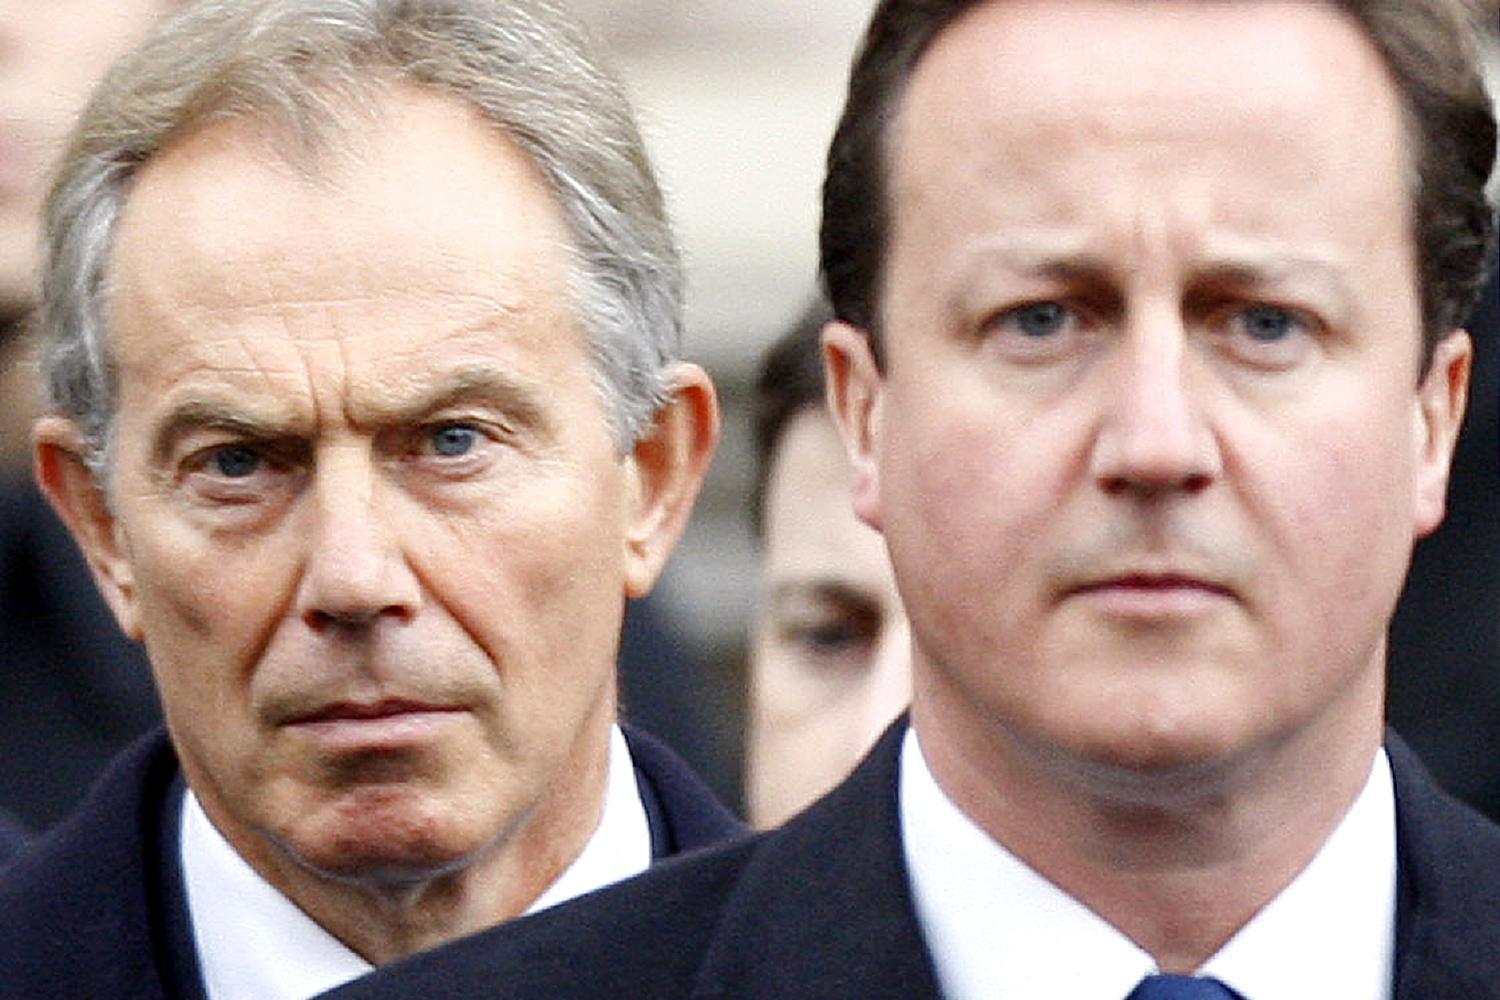 Photo of David Cameron appearing at a Remembrance Day service at the Cenotaph with Tony Blair over his shoulder